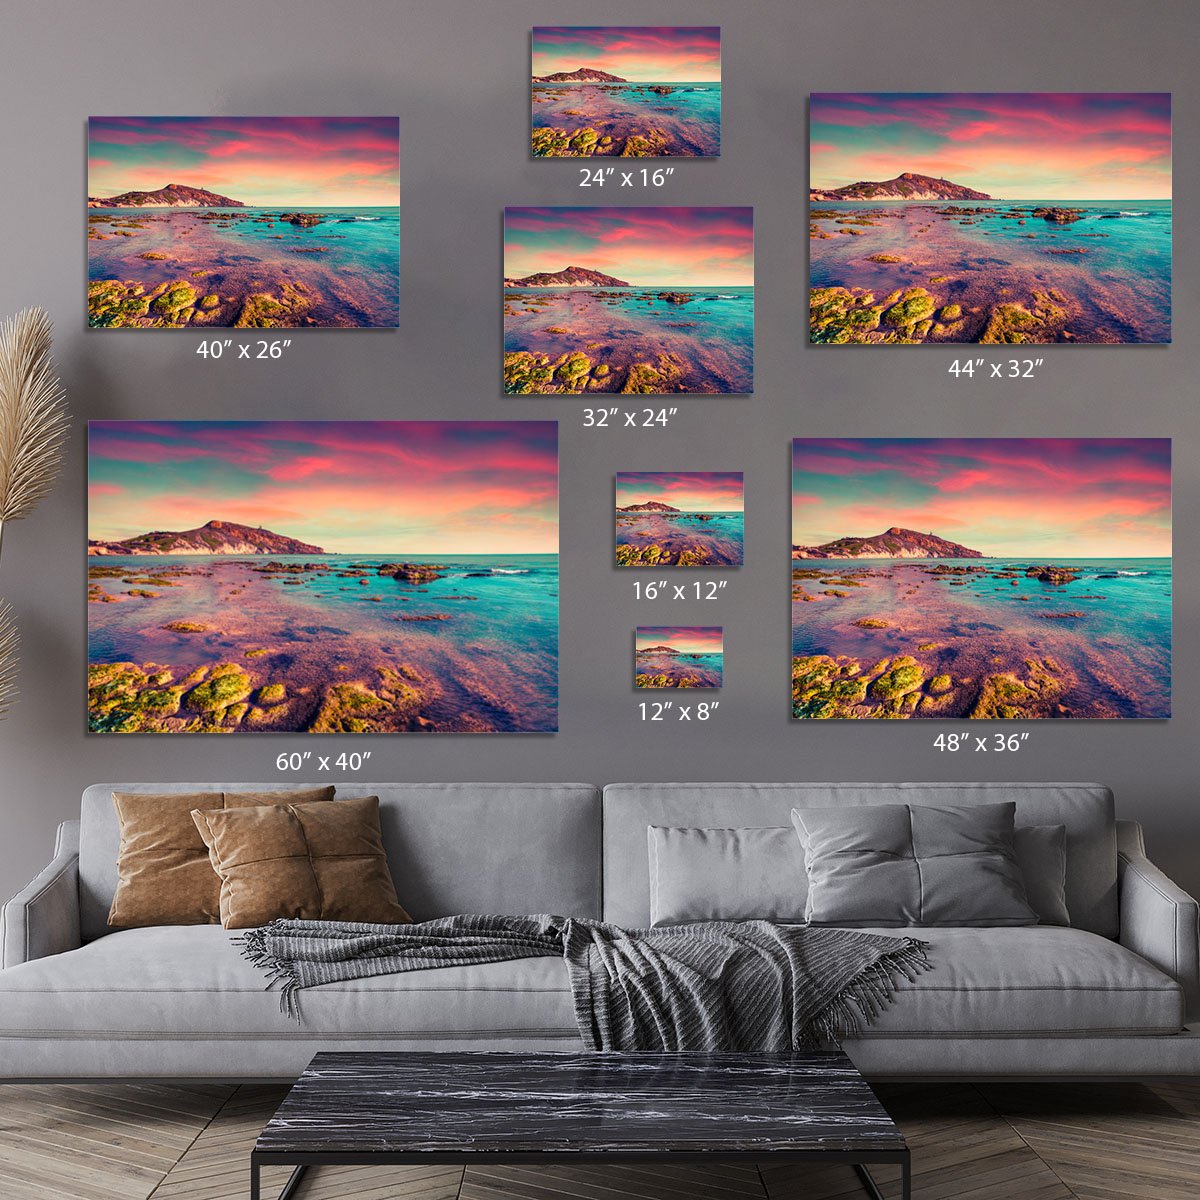 Spring sunset from the Giallonardo Canvas Print or Poster